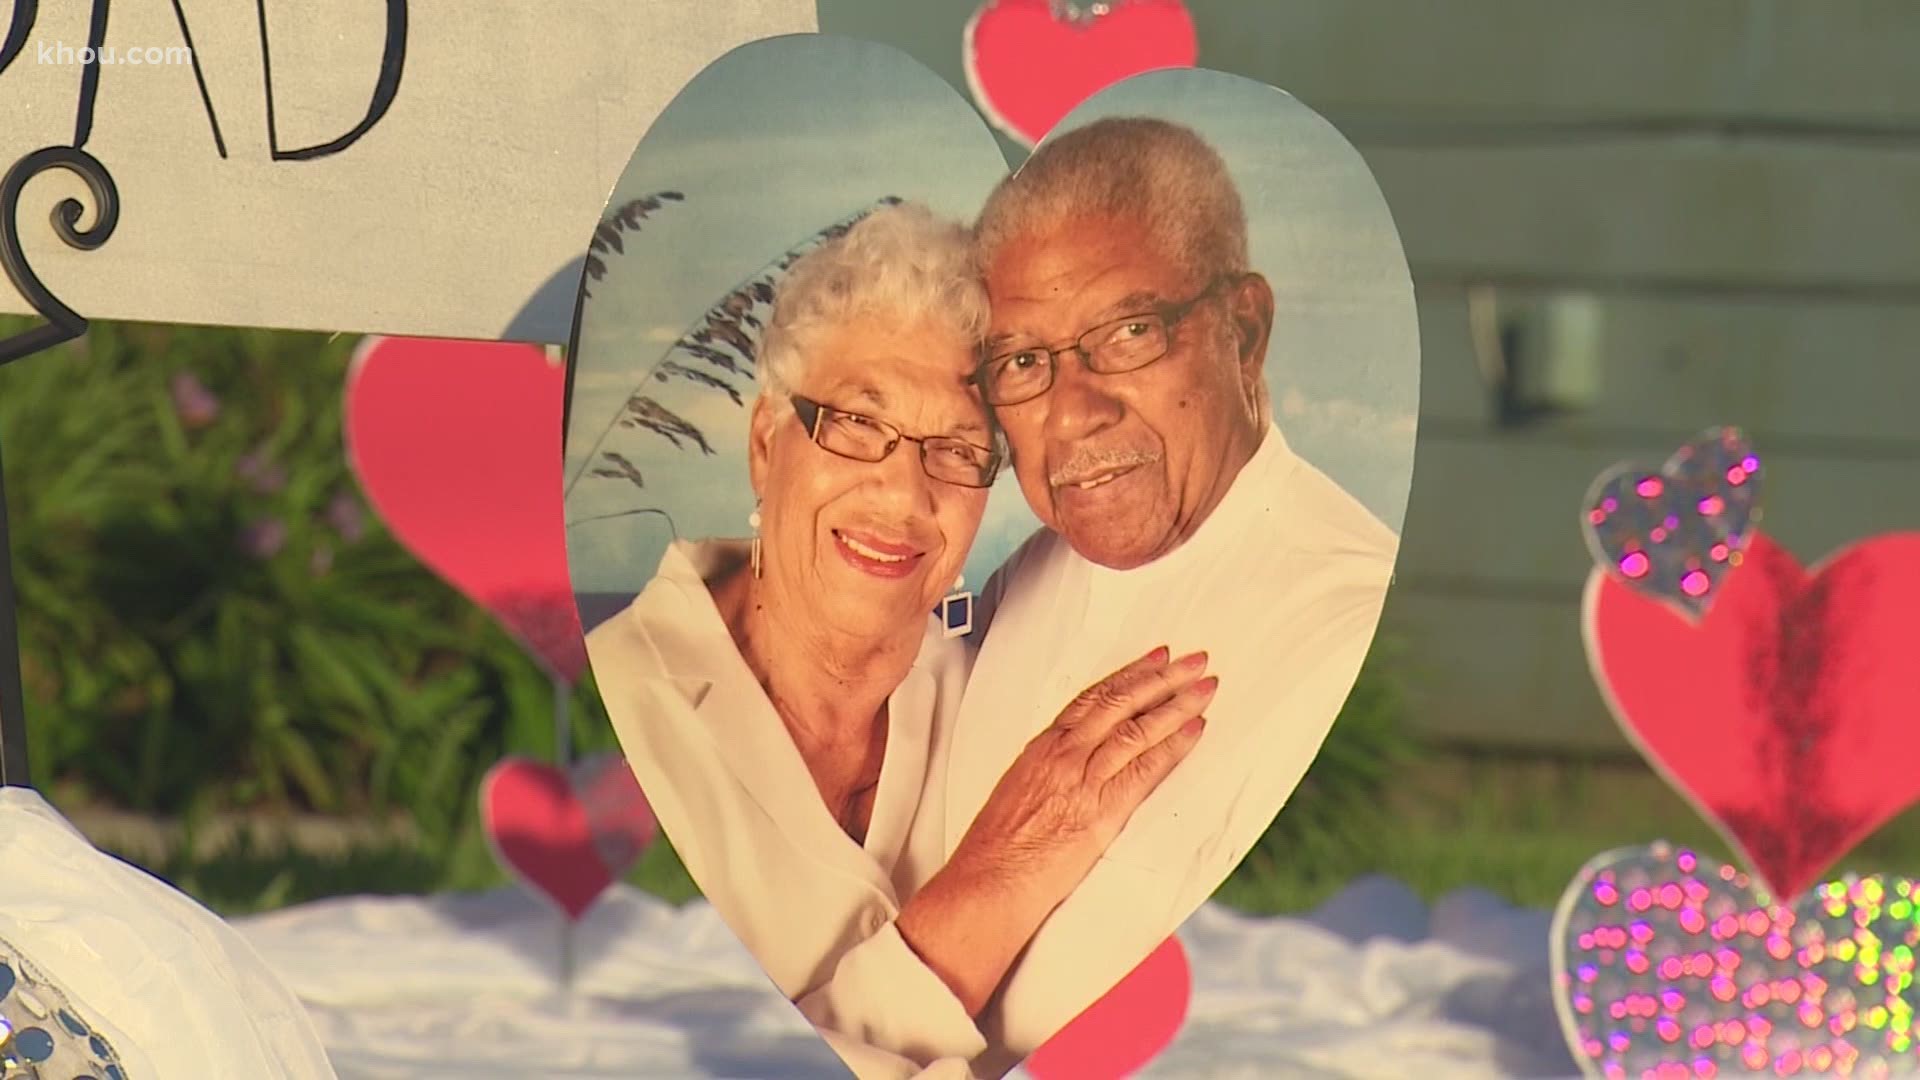 In their 70 years together, they’ve never seen anything like it.